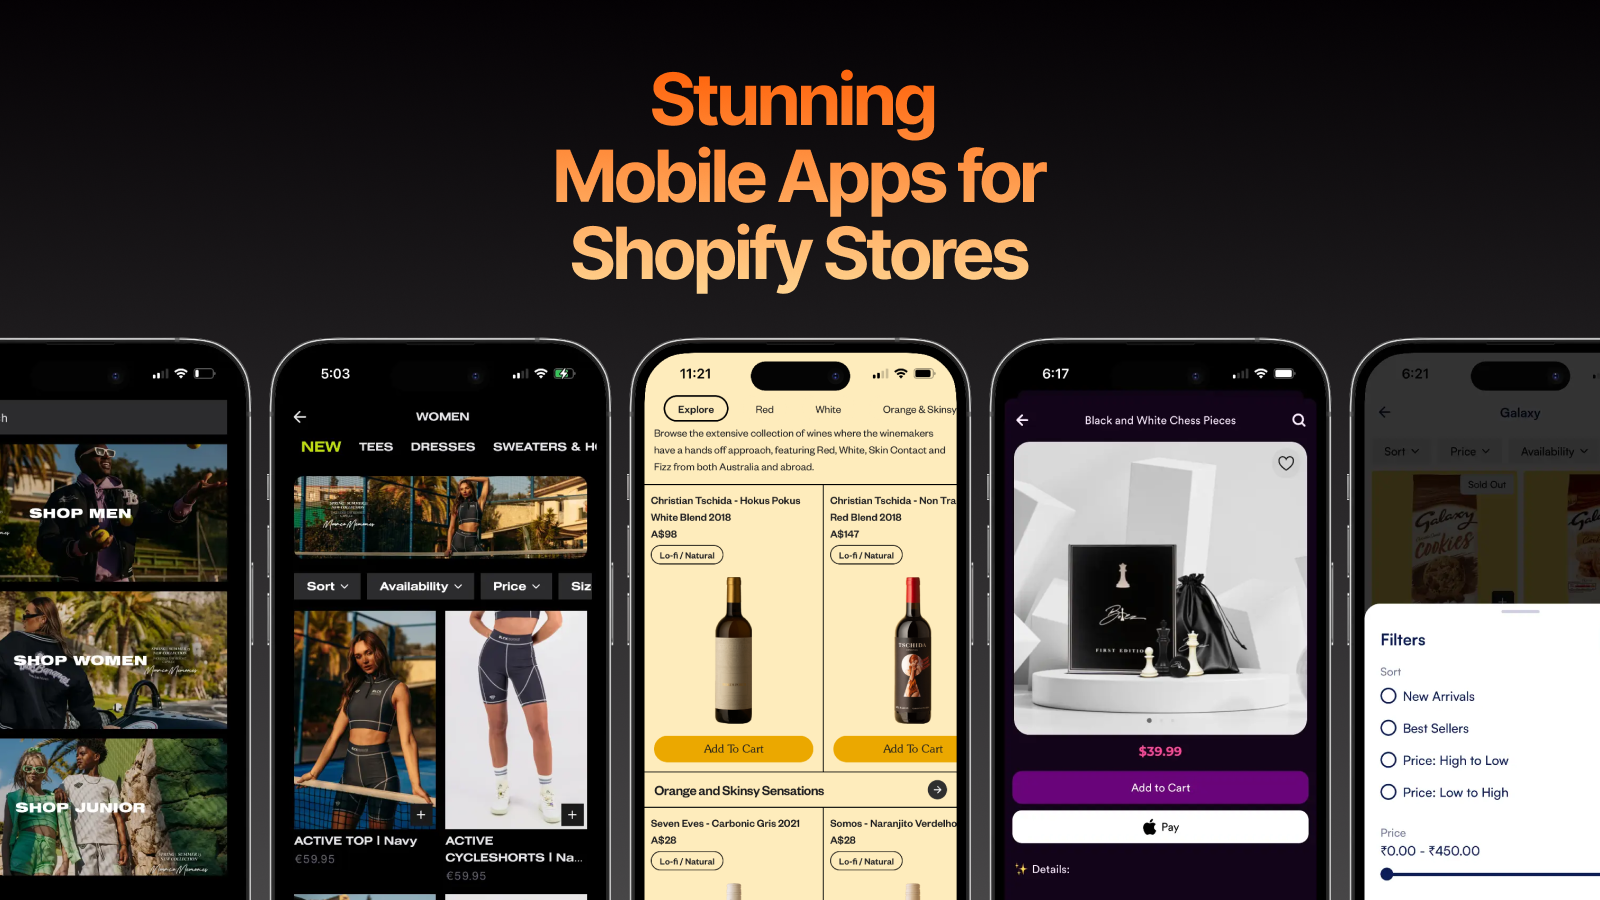 Turn you store into a mobile app with Fuego!